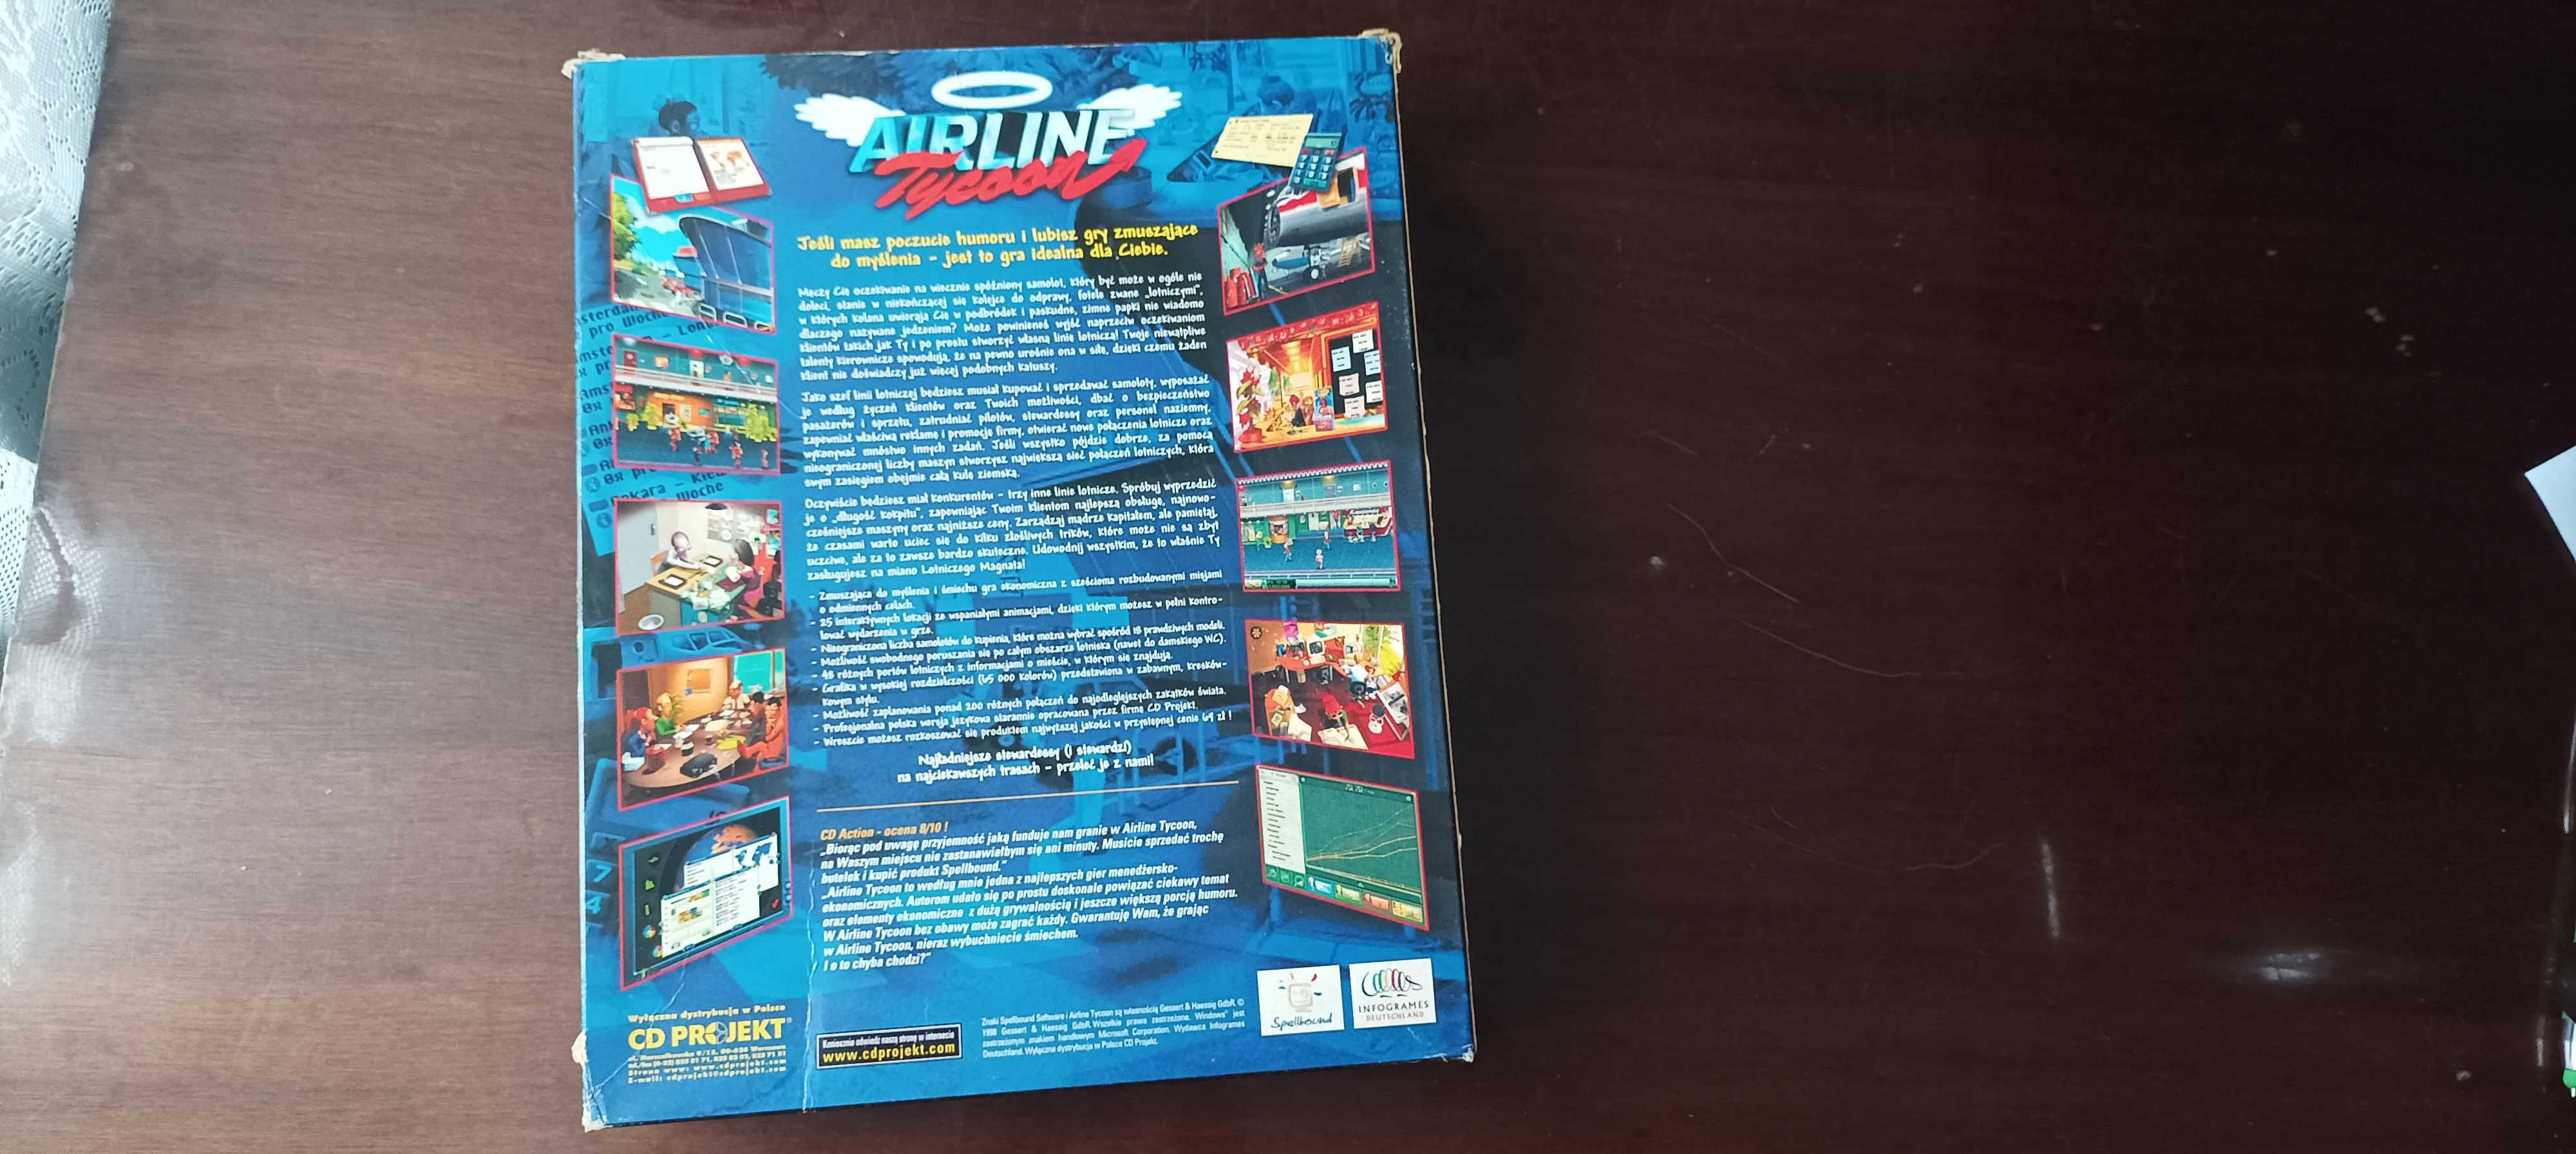 Airline Tycoon - Box